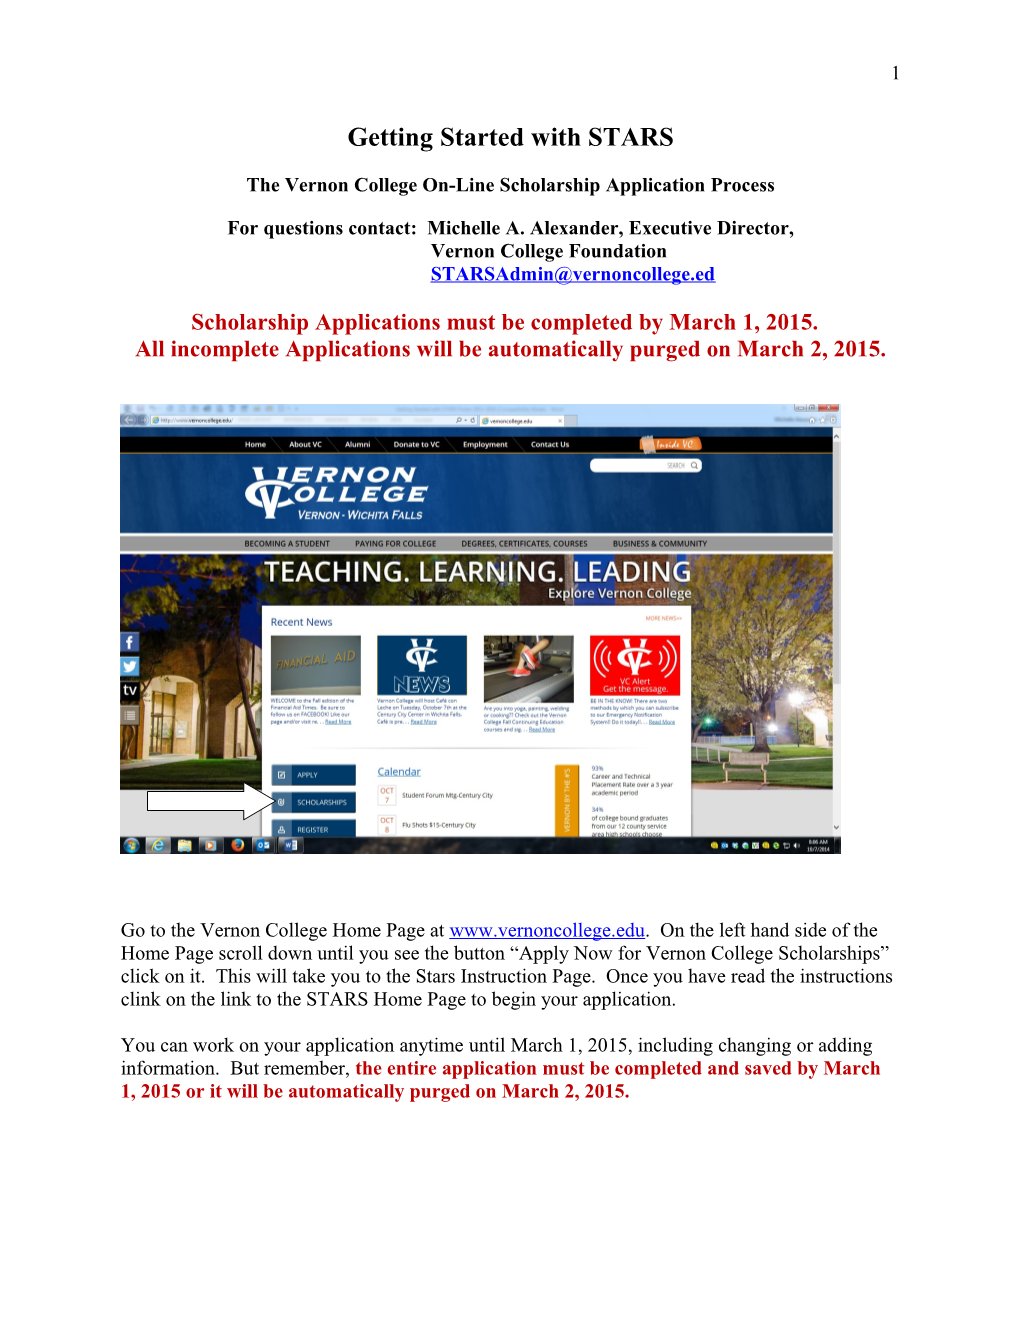 The Vernon College On-Line Scholarship Application Process